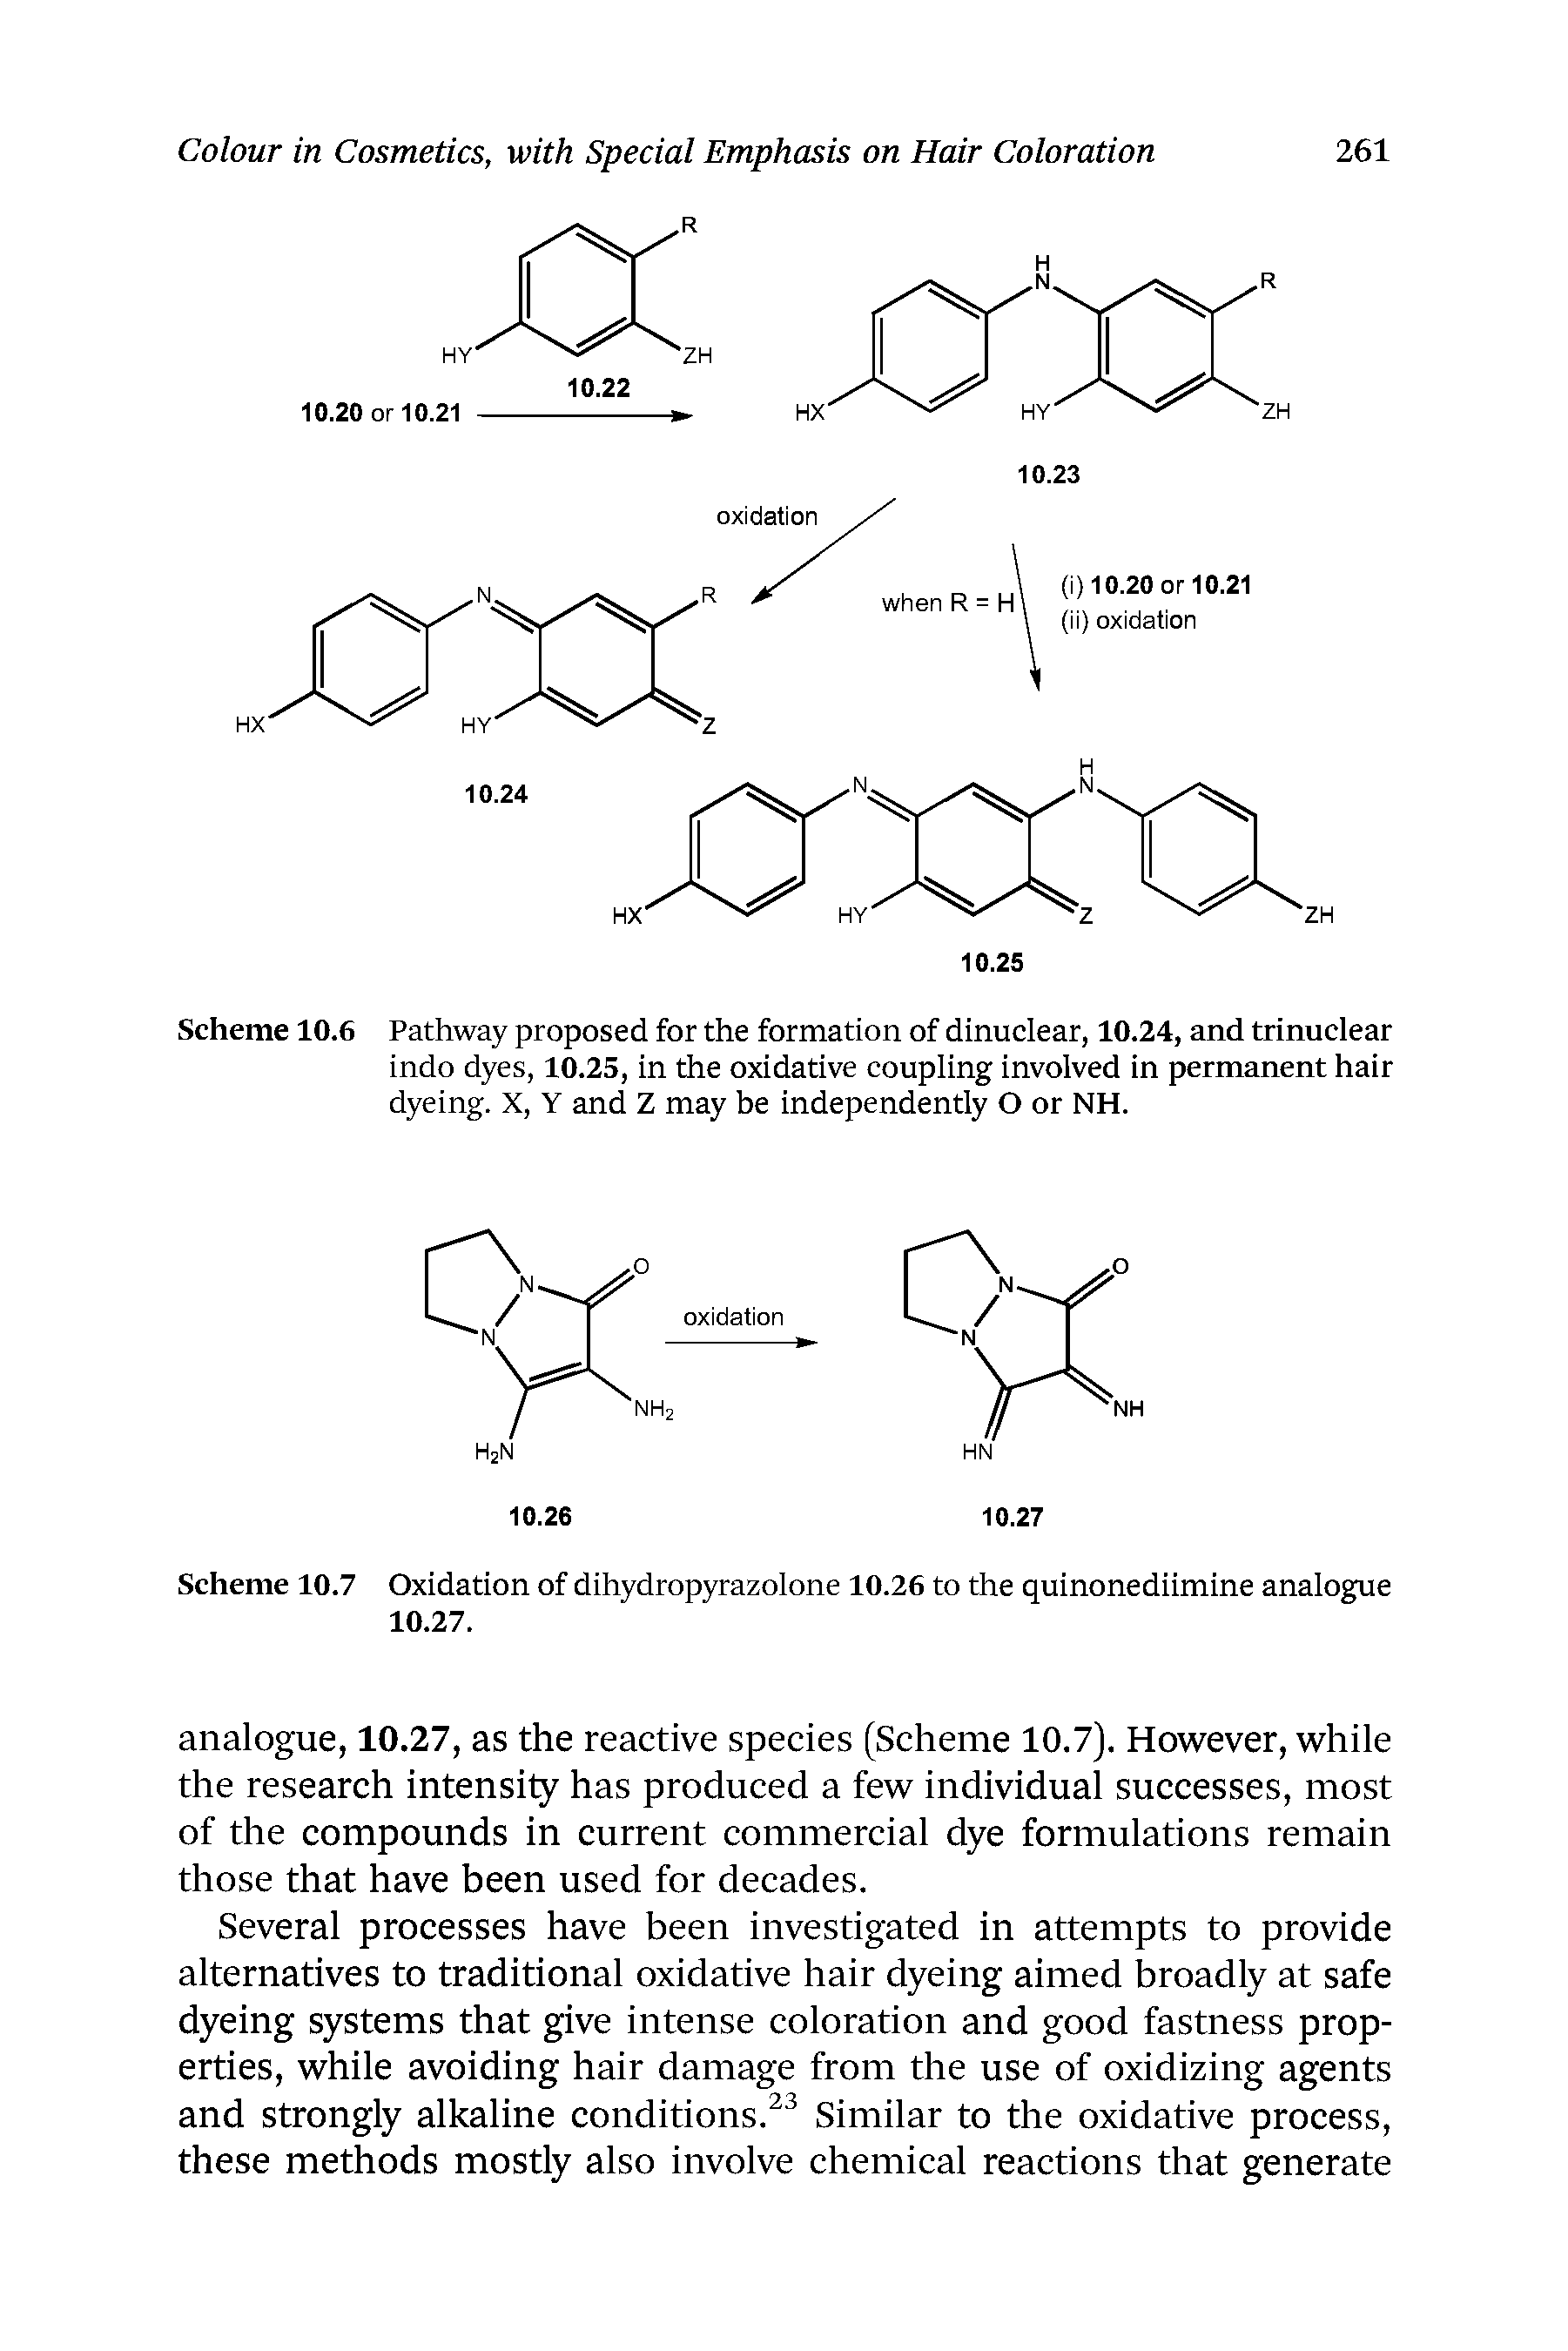 Scheme 10.6 Pathway proposed for the formation of dinuclear, 10.24, and trinuclear indo dyes, 10.25, in the oxidative coupling involved in permanent hair dyeing. X, Y and Z may be independently O or NH.